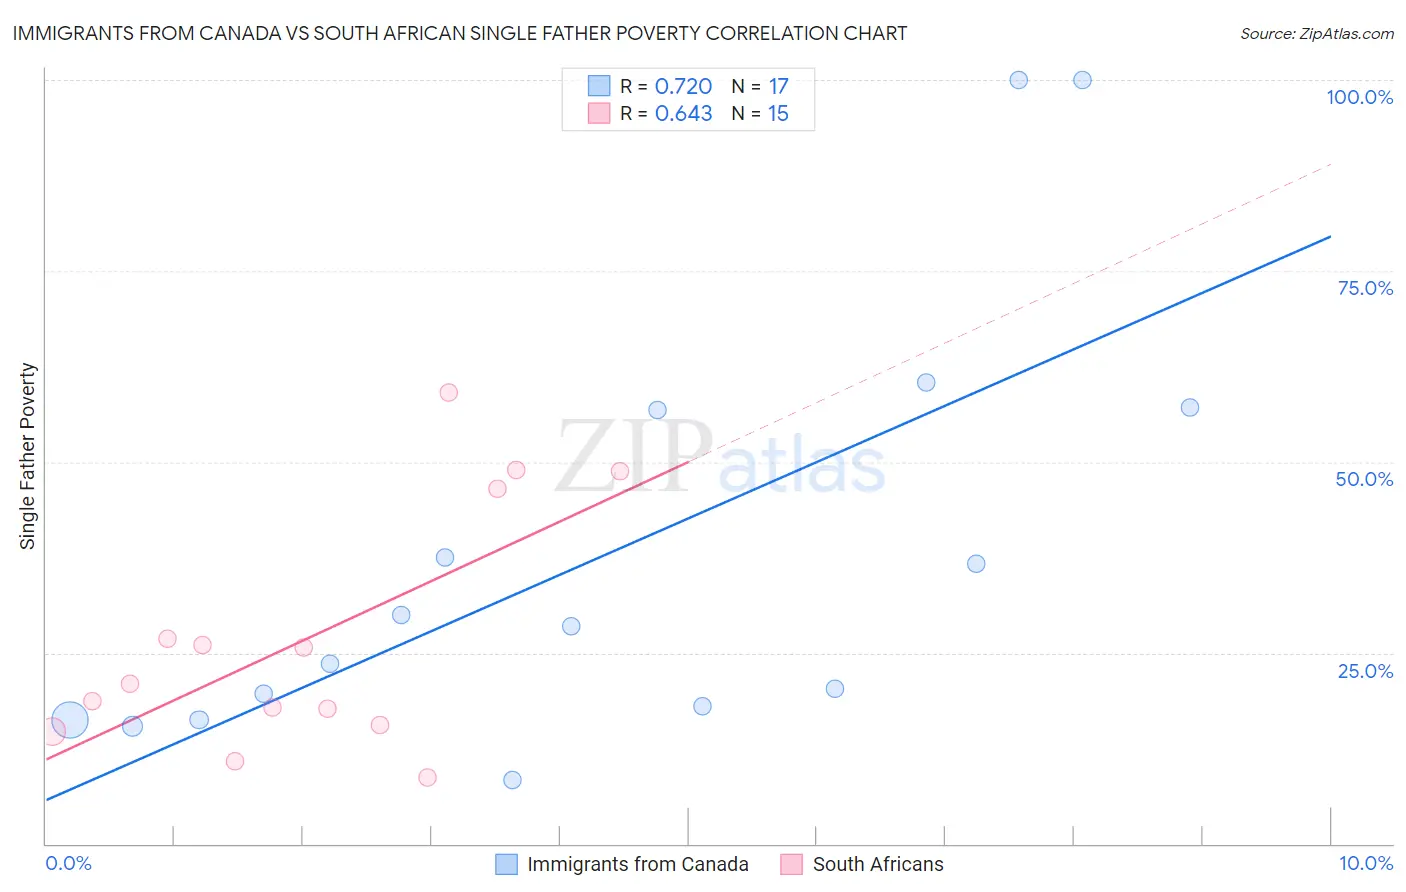 Immigrants from Canada vs South African Single Father Poverty